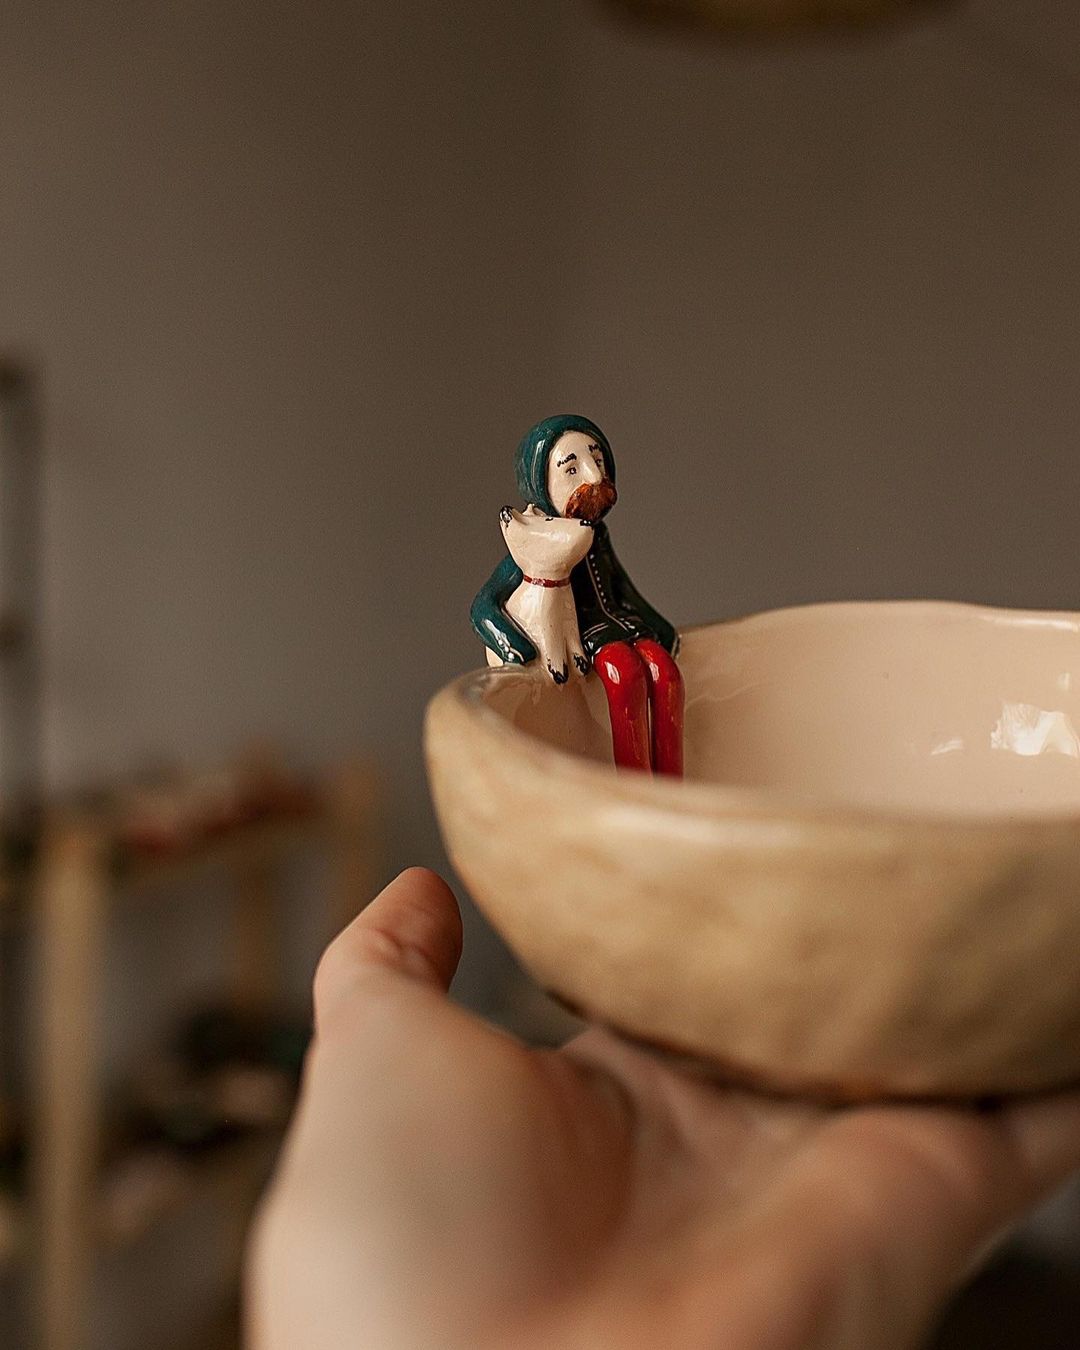 Delicate Ceramics Decorated With Lovely Figure Sculptures By Nadya And Olga (1)